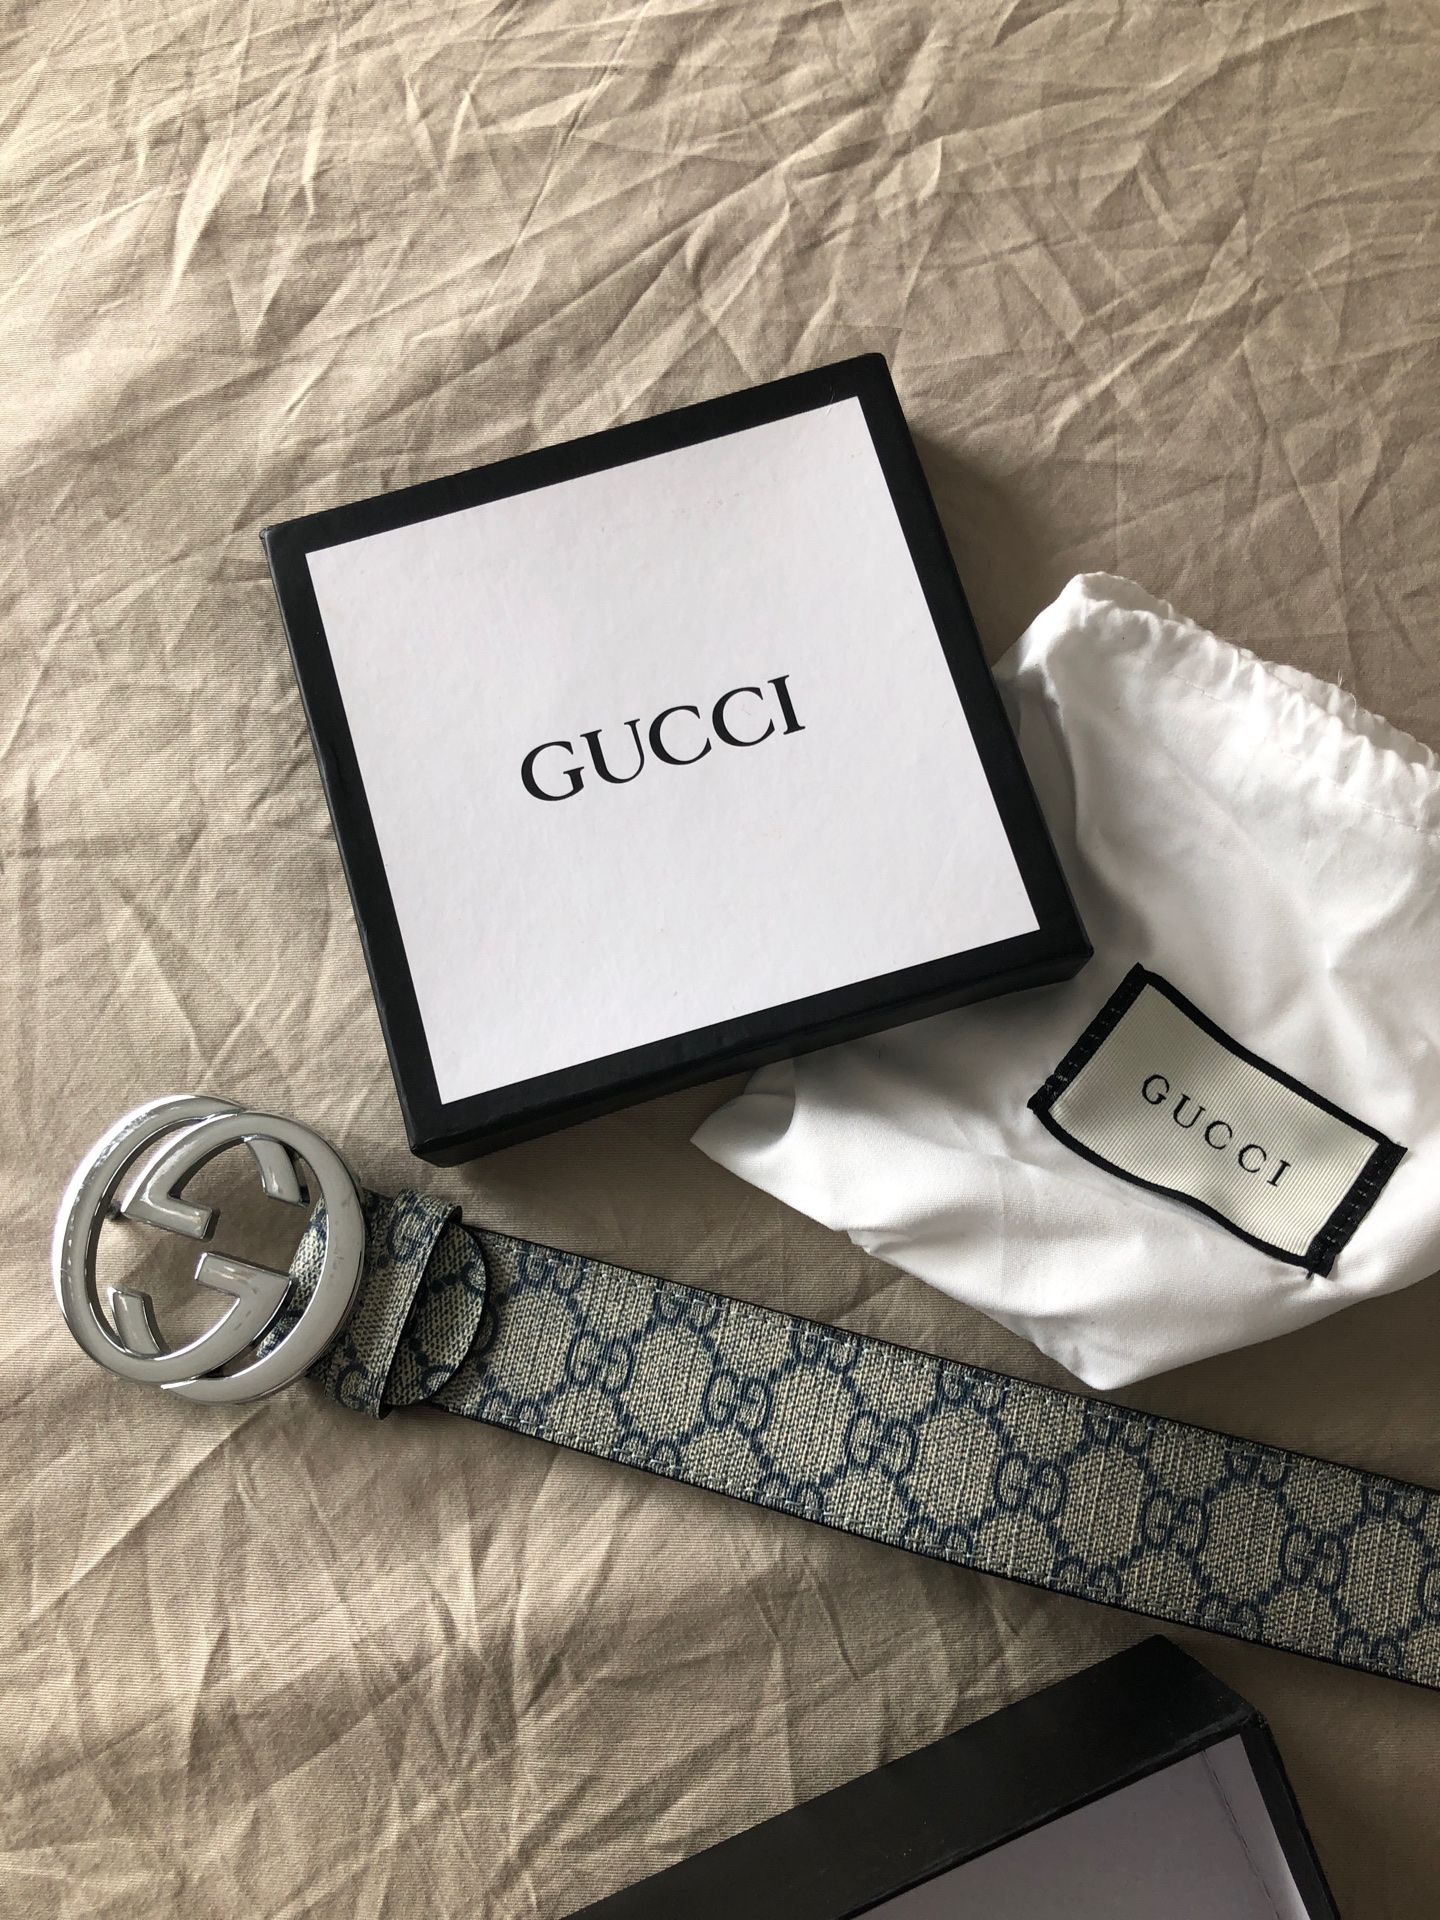 Gucci belt with box and bag